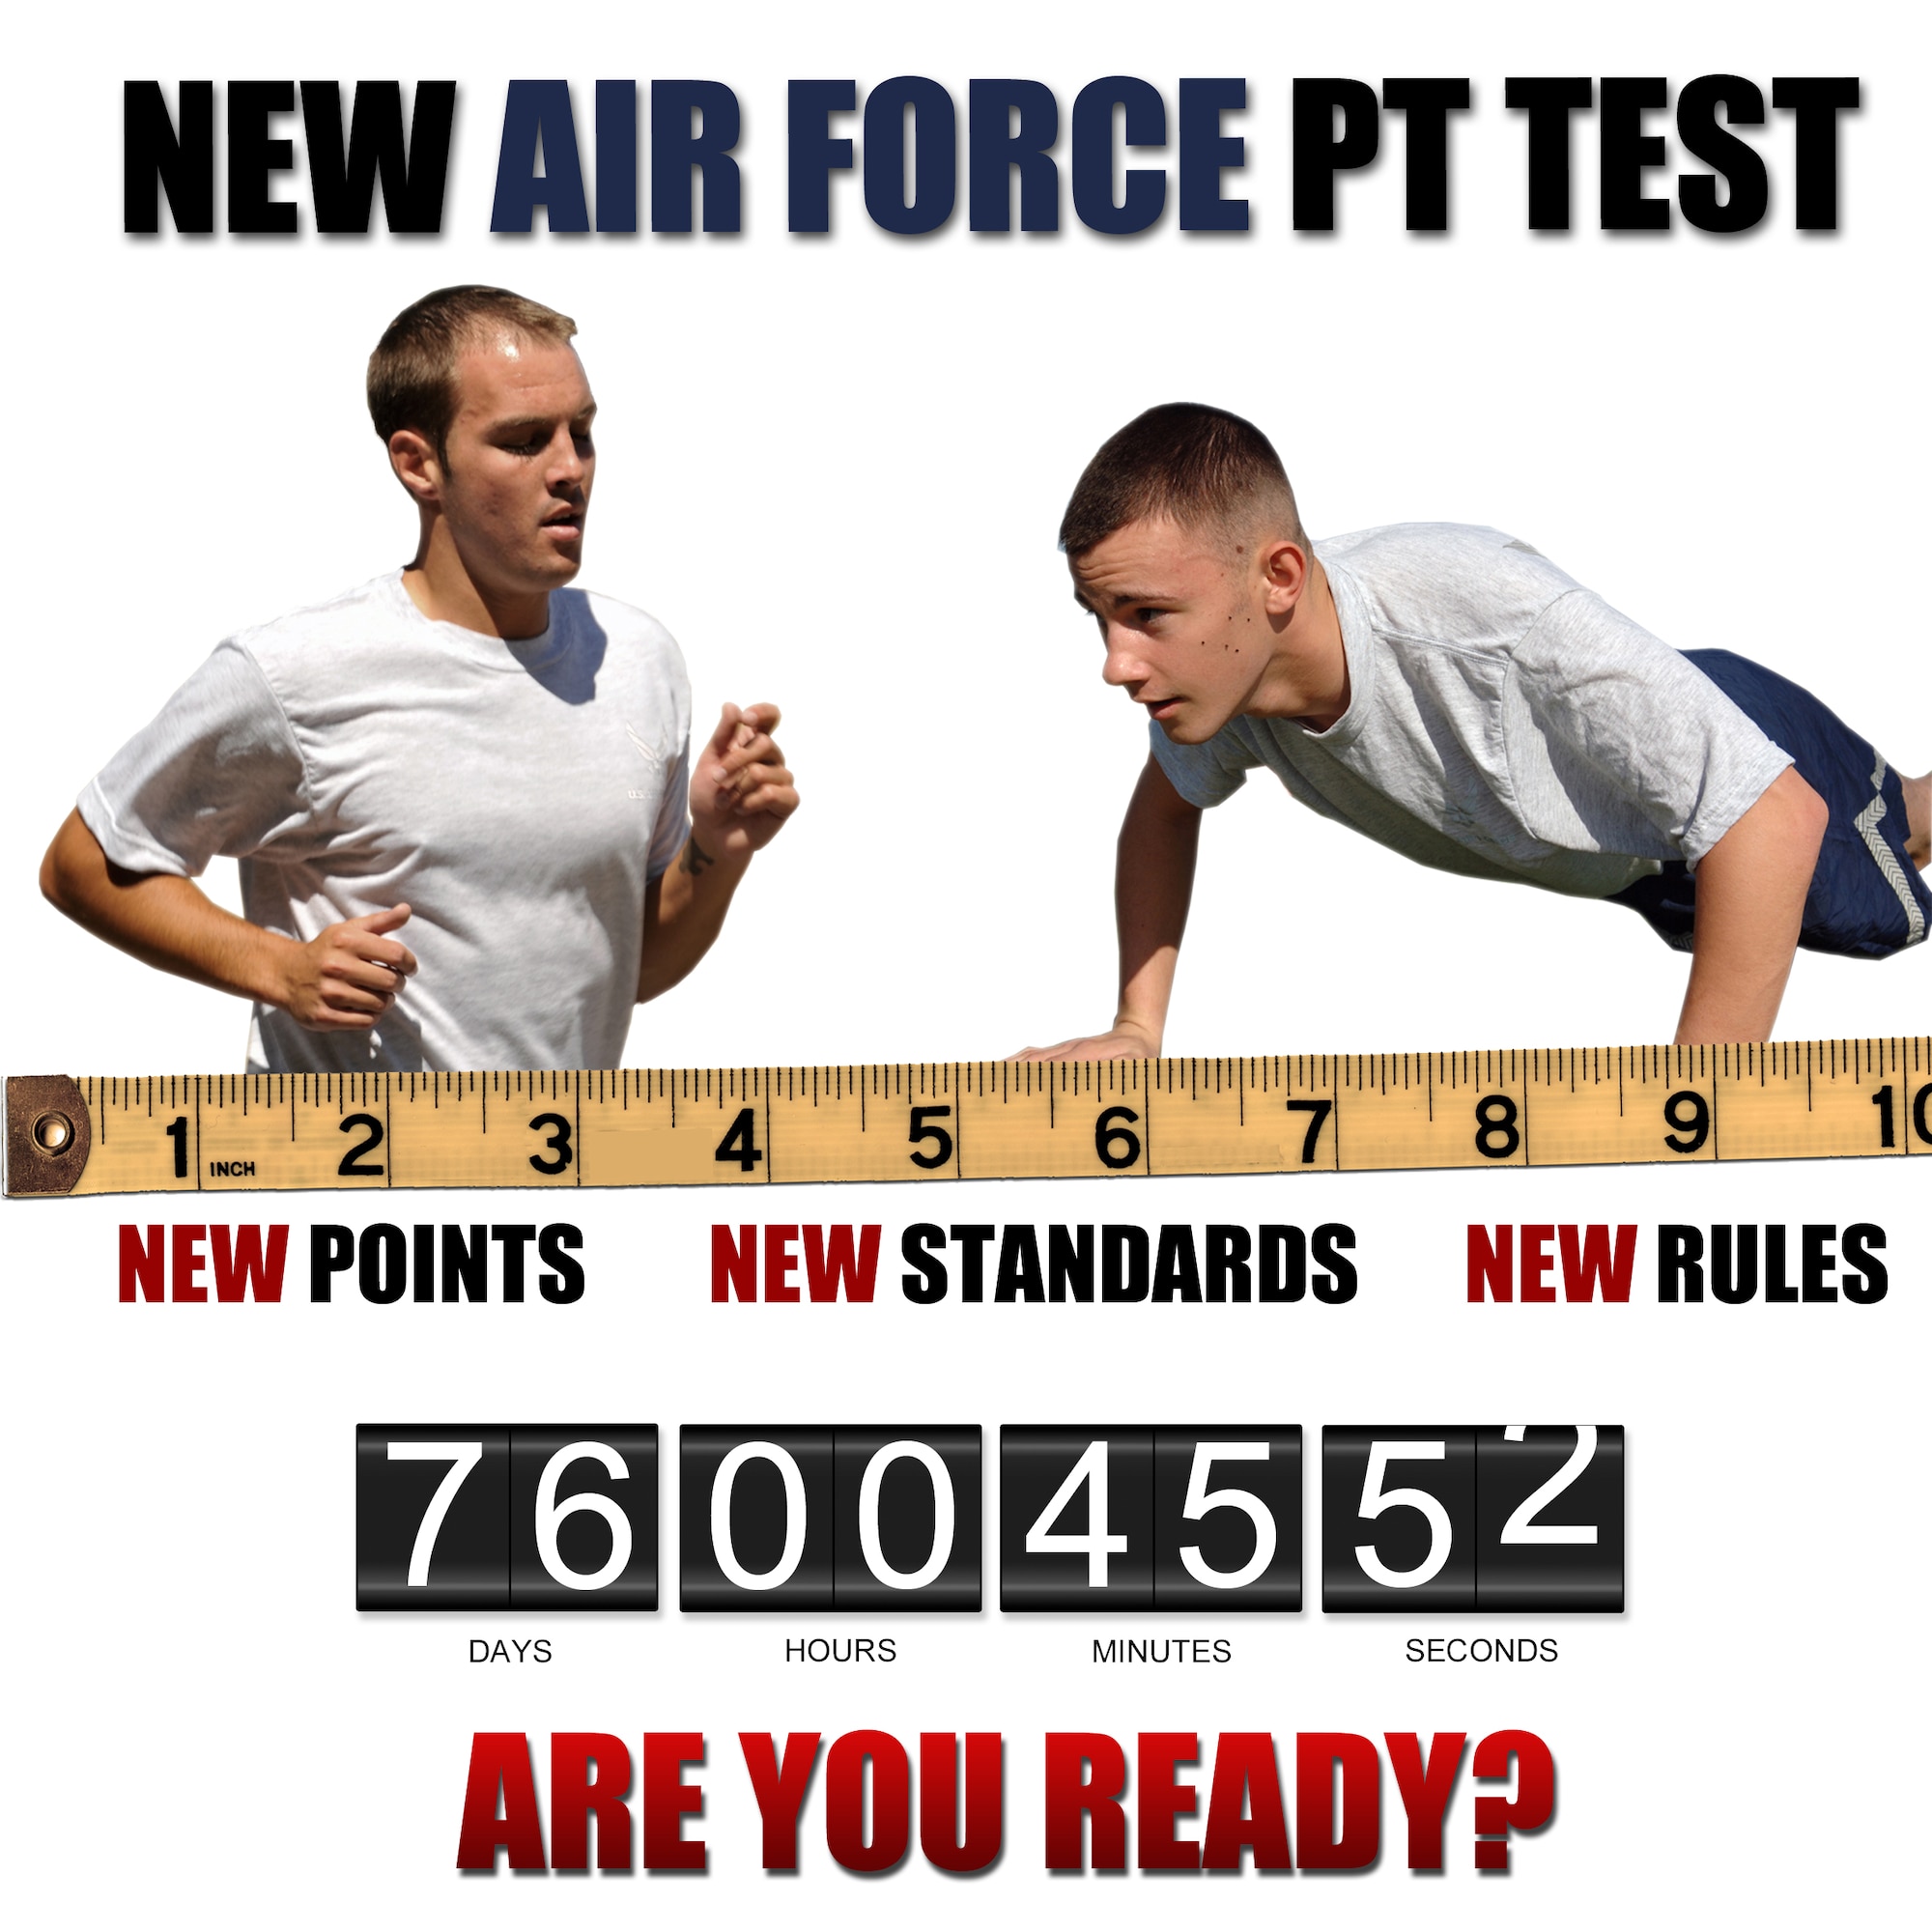 SCOTT AIR FORCE BASE, Ill. -- New Air Force PT standards graphic. (Graphic by Senior Airman Ryan Crane)